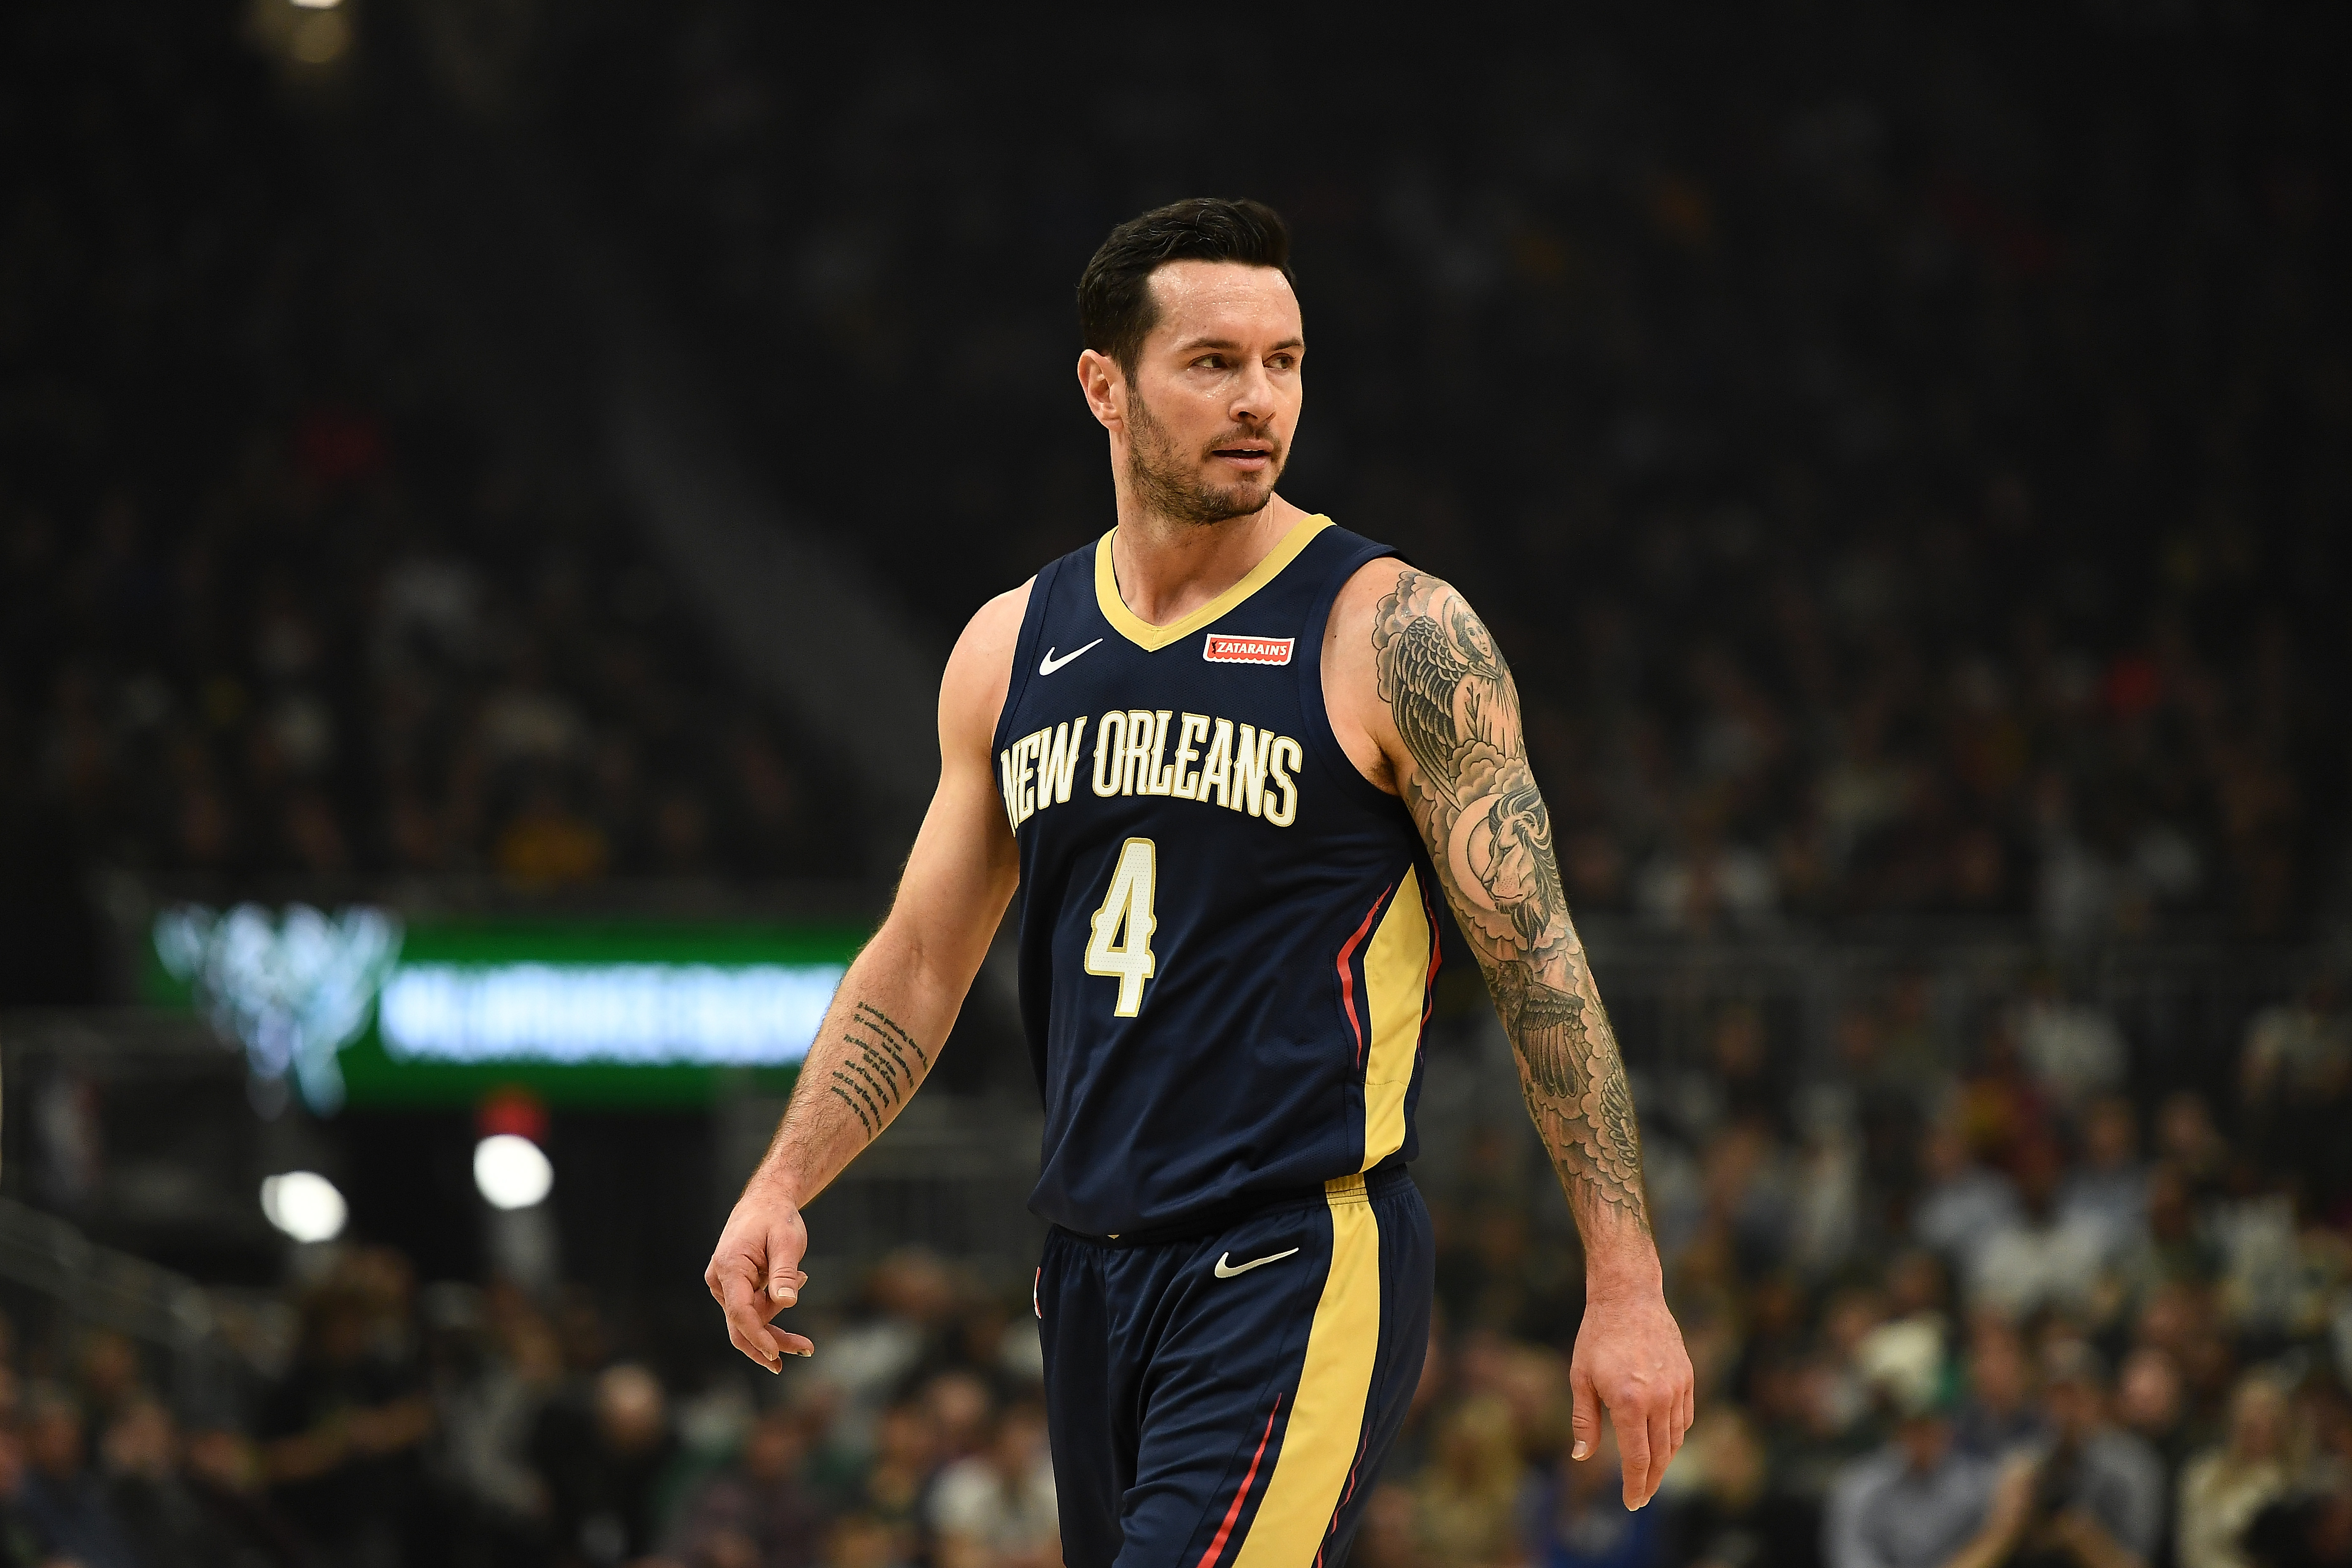 Top 3 most underrated 2023 NBA offseason moves according to JJ Redick